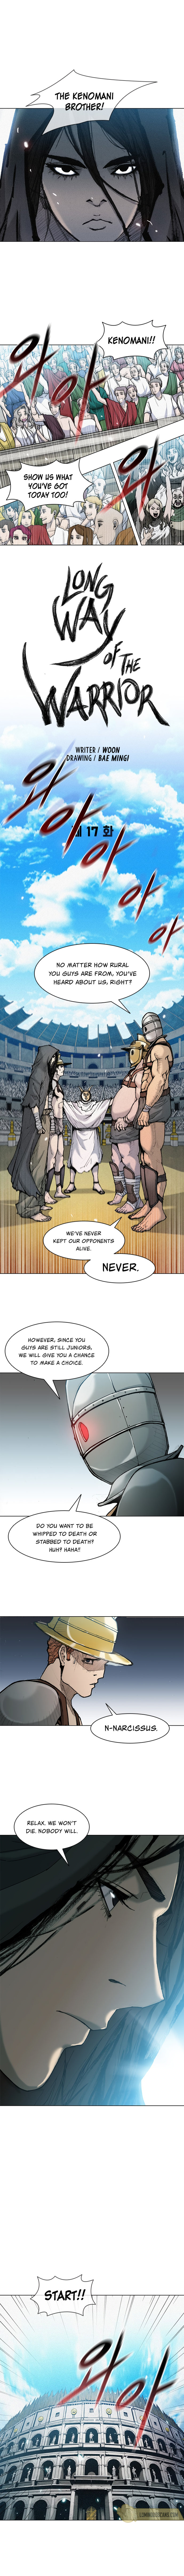 Long Way of the Warrior - Chapter 17 Page 6